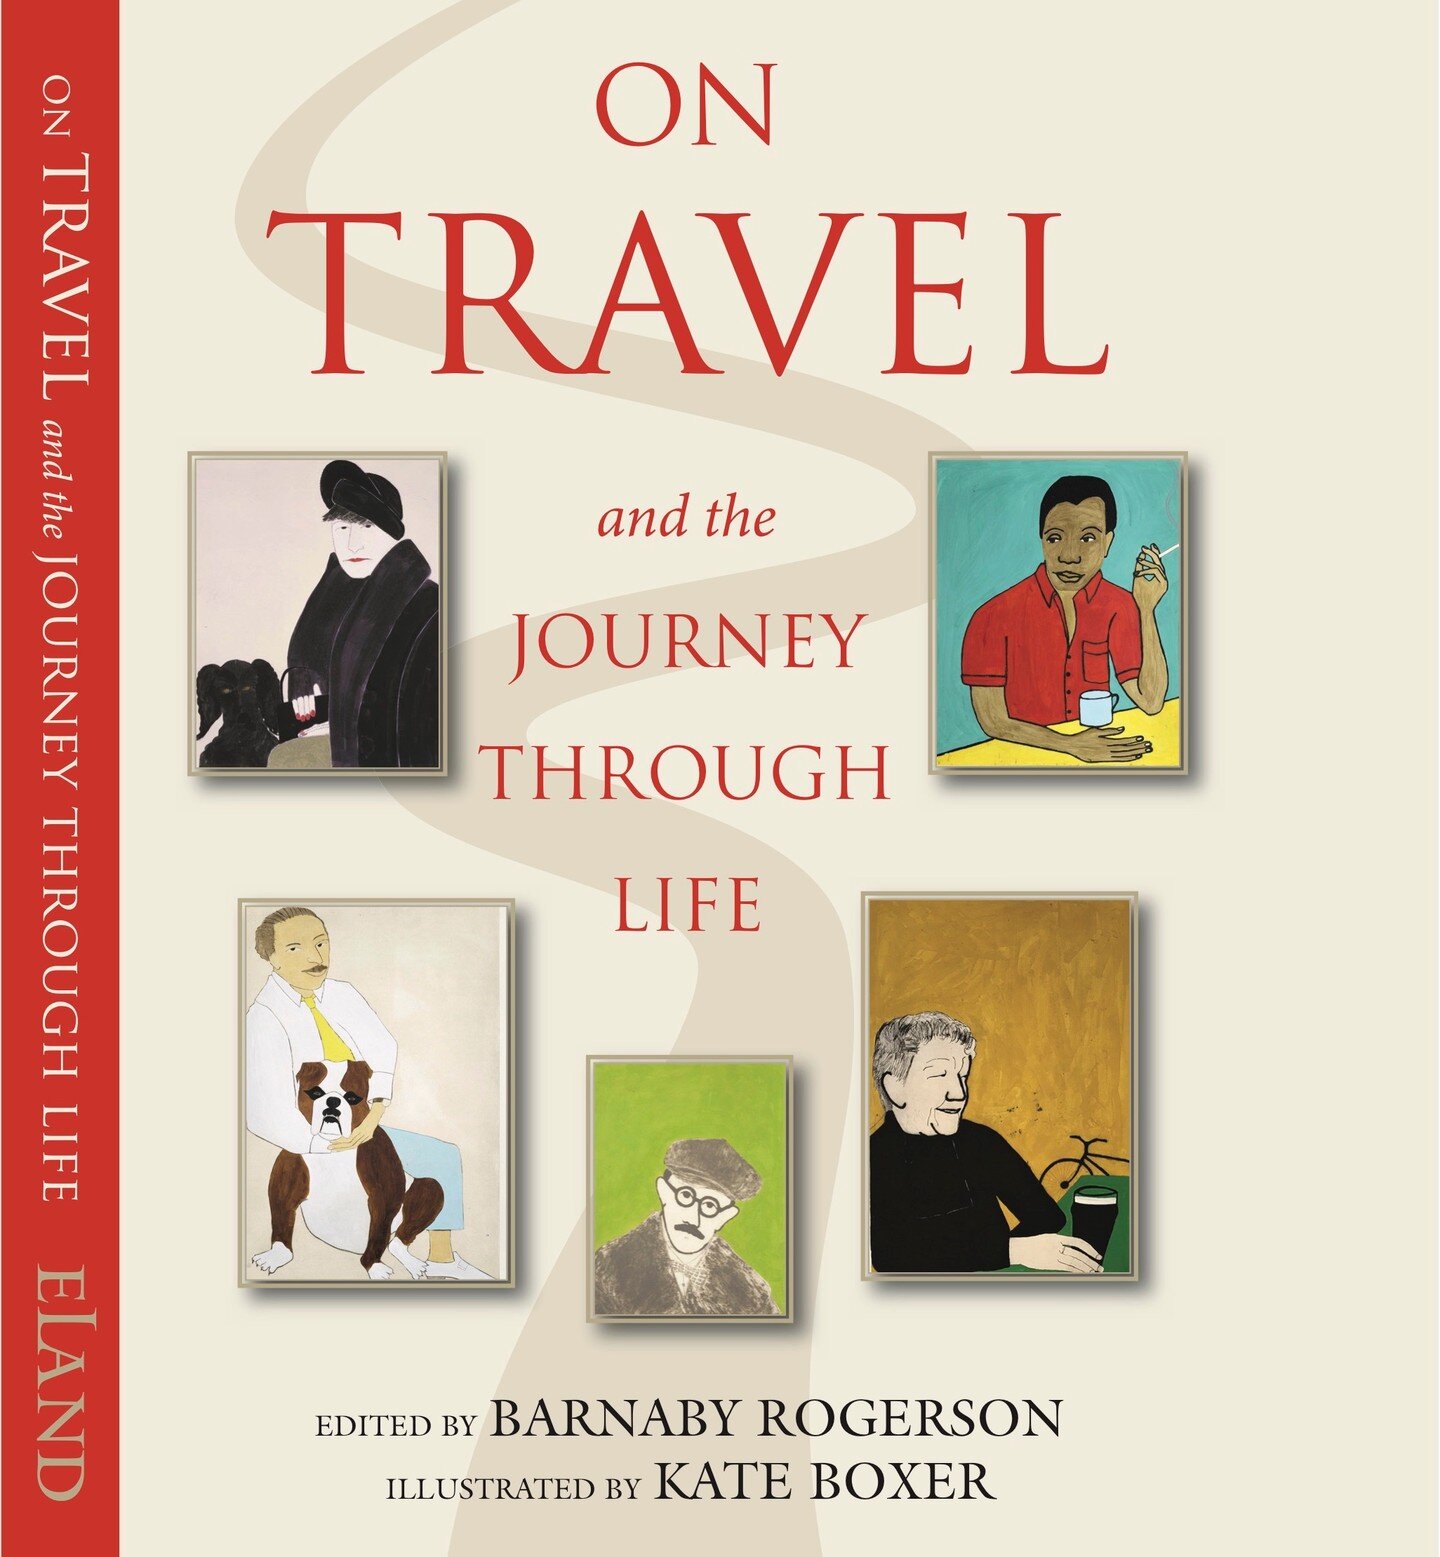 On TRAVEL and the Journey Through Life. Our latest newsletter is now up on our website, featuring Rose's preface to 'On Travel', quotes chosen by Barnaby &amp; illustrations from Kate Boxer.

Our newsletter also features @jeremy.bassetti on Ronald Wr